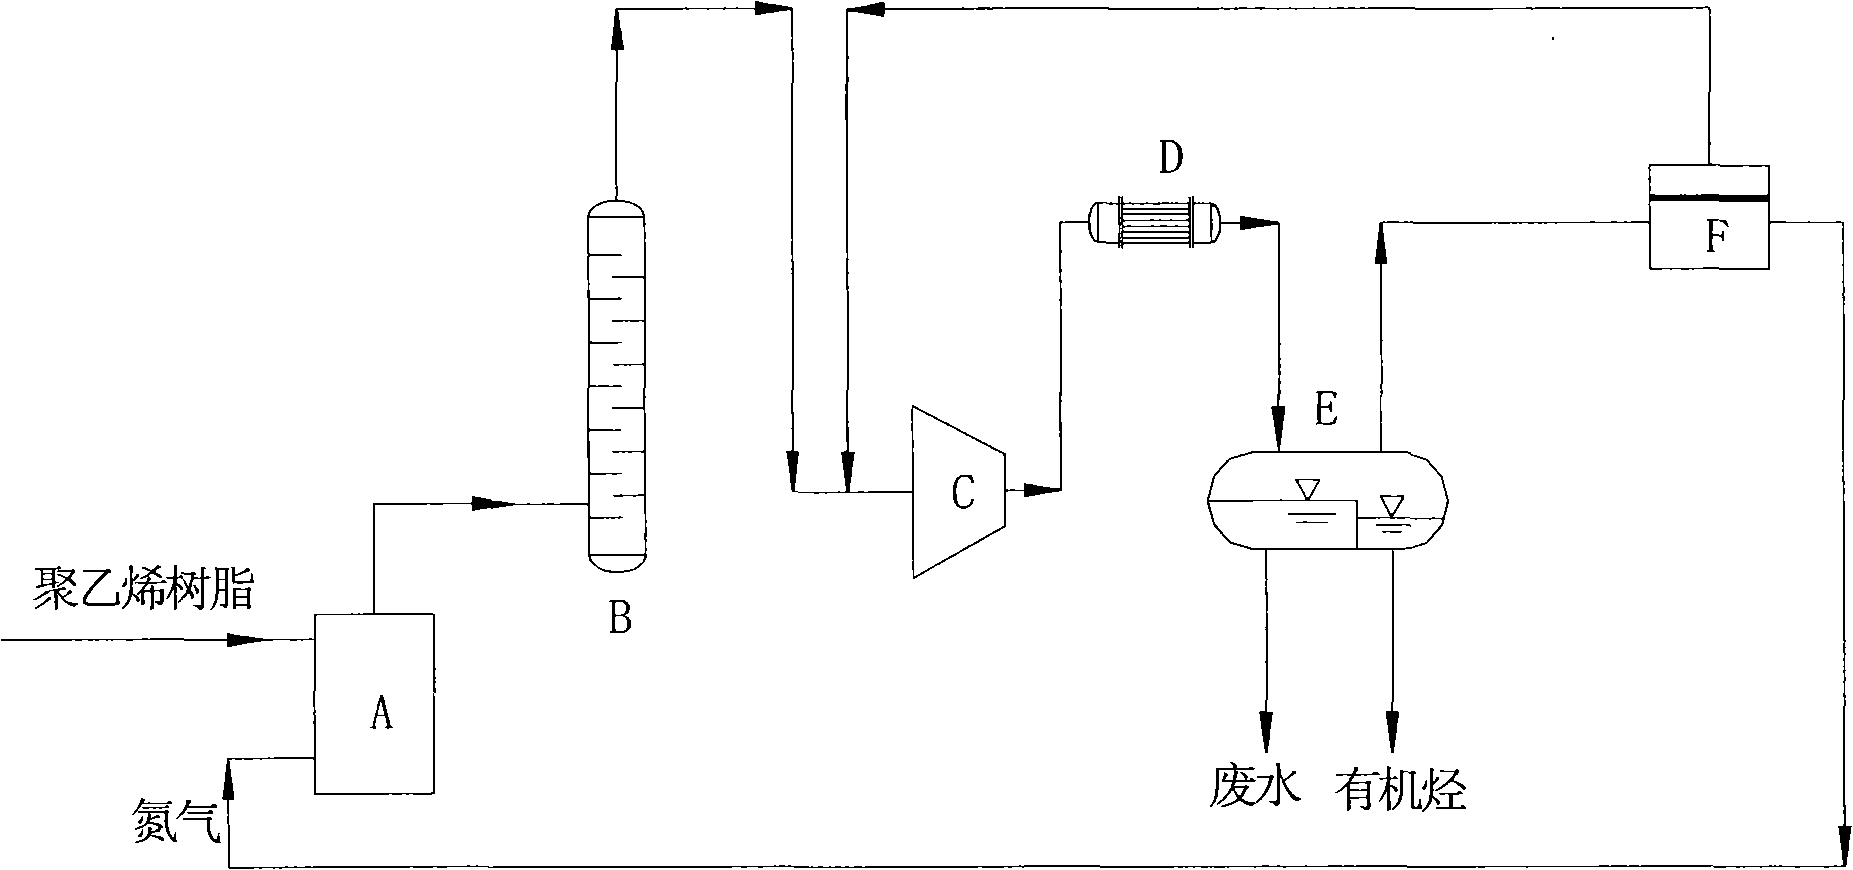 Technique for reclaiming organic hydrocarbon and nitrogen gas from polyethylene device tail gas